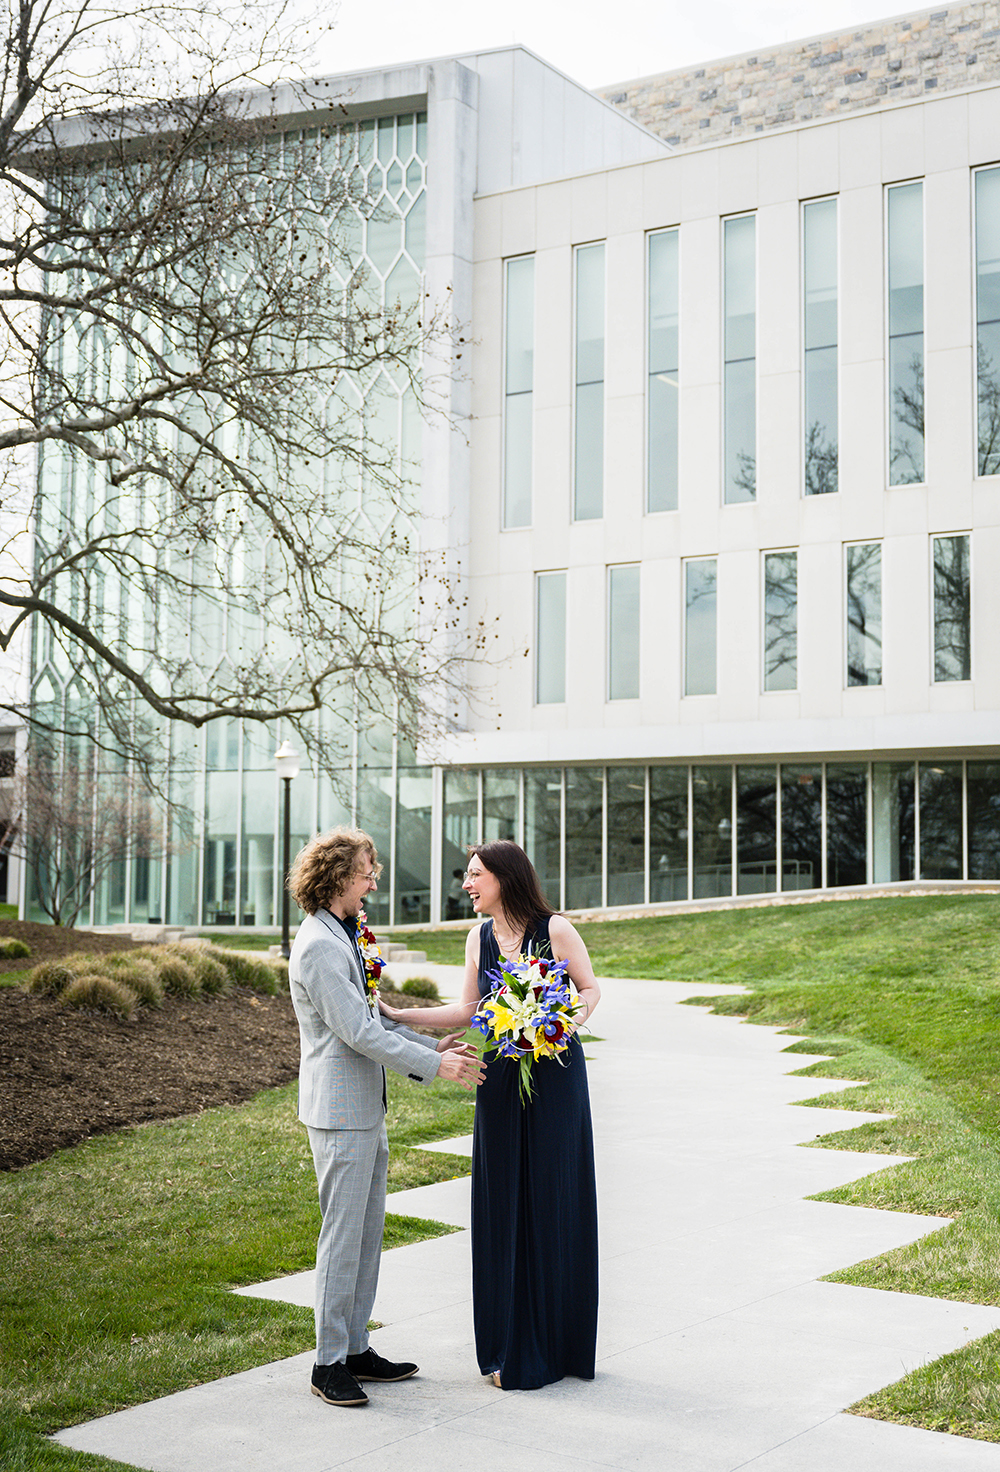 A bride and groom react warmly and happily during their first look on their elopement day outside of the Moss Arts Center.